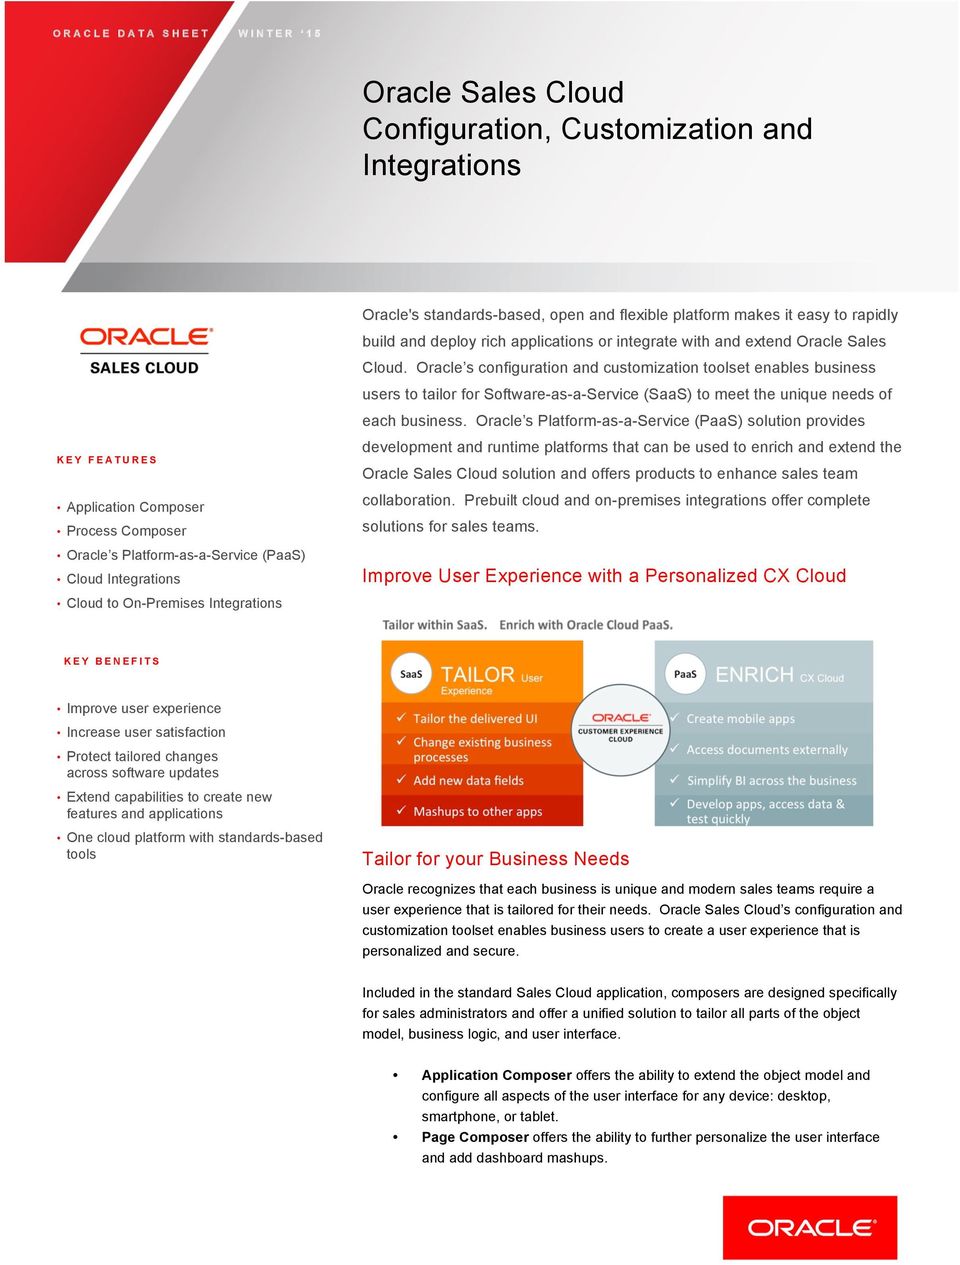 Oracle s configuration and customization toolset enables business users to tailor for Software-as-a-Service (SaaS) to meet the unique needs of each business.